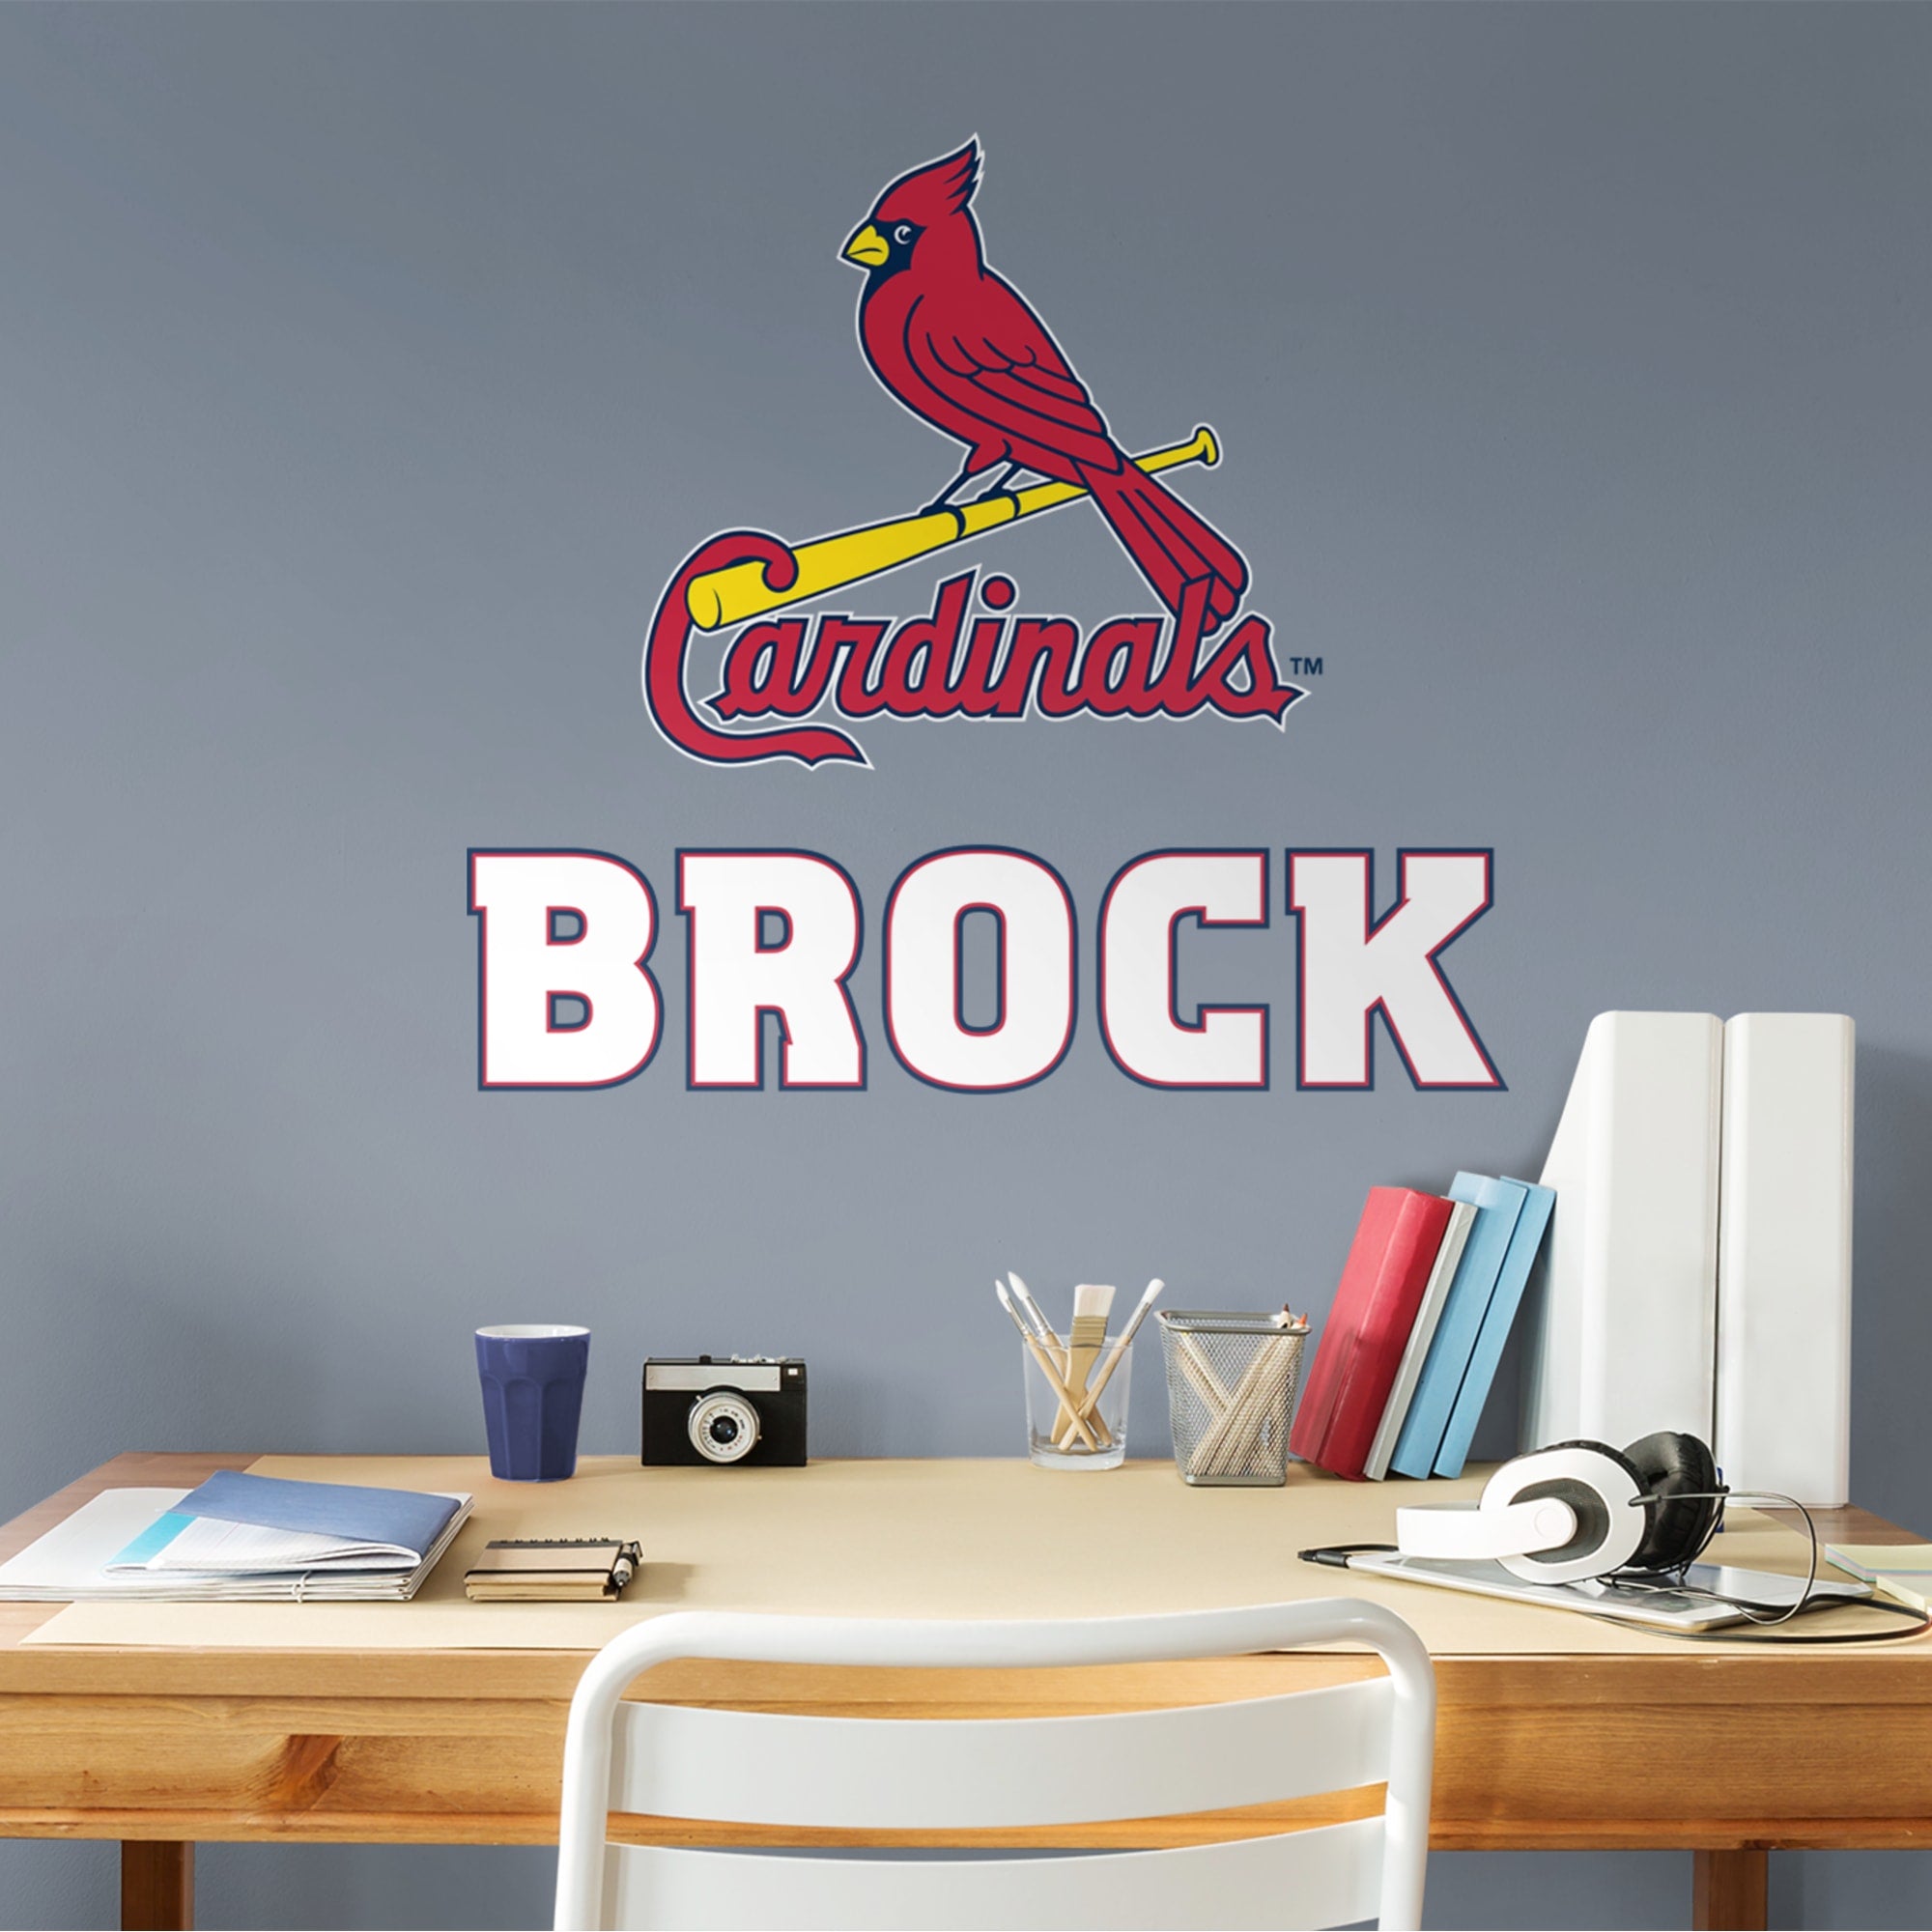 St. Louis Cardinals: Stacked Personalized Name - Officially Licensed MLB Transfer Decal in White (52"W x 39.5"H) by Fathead | Vi